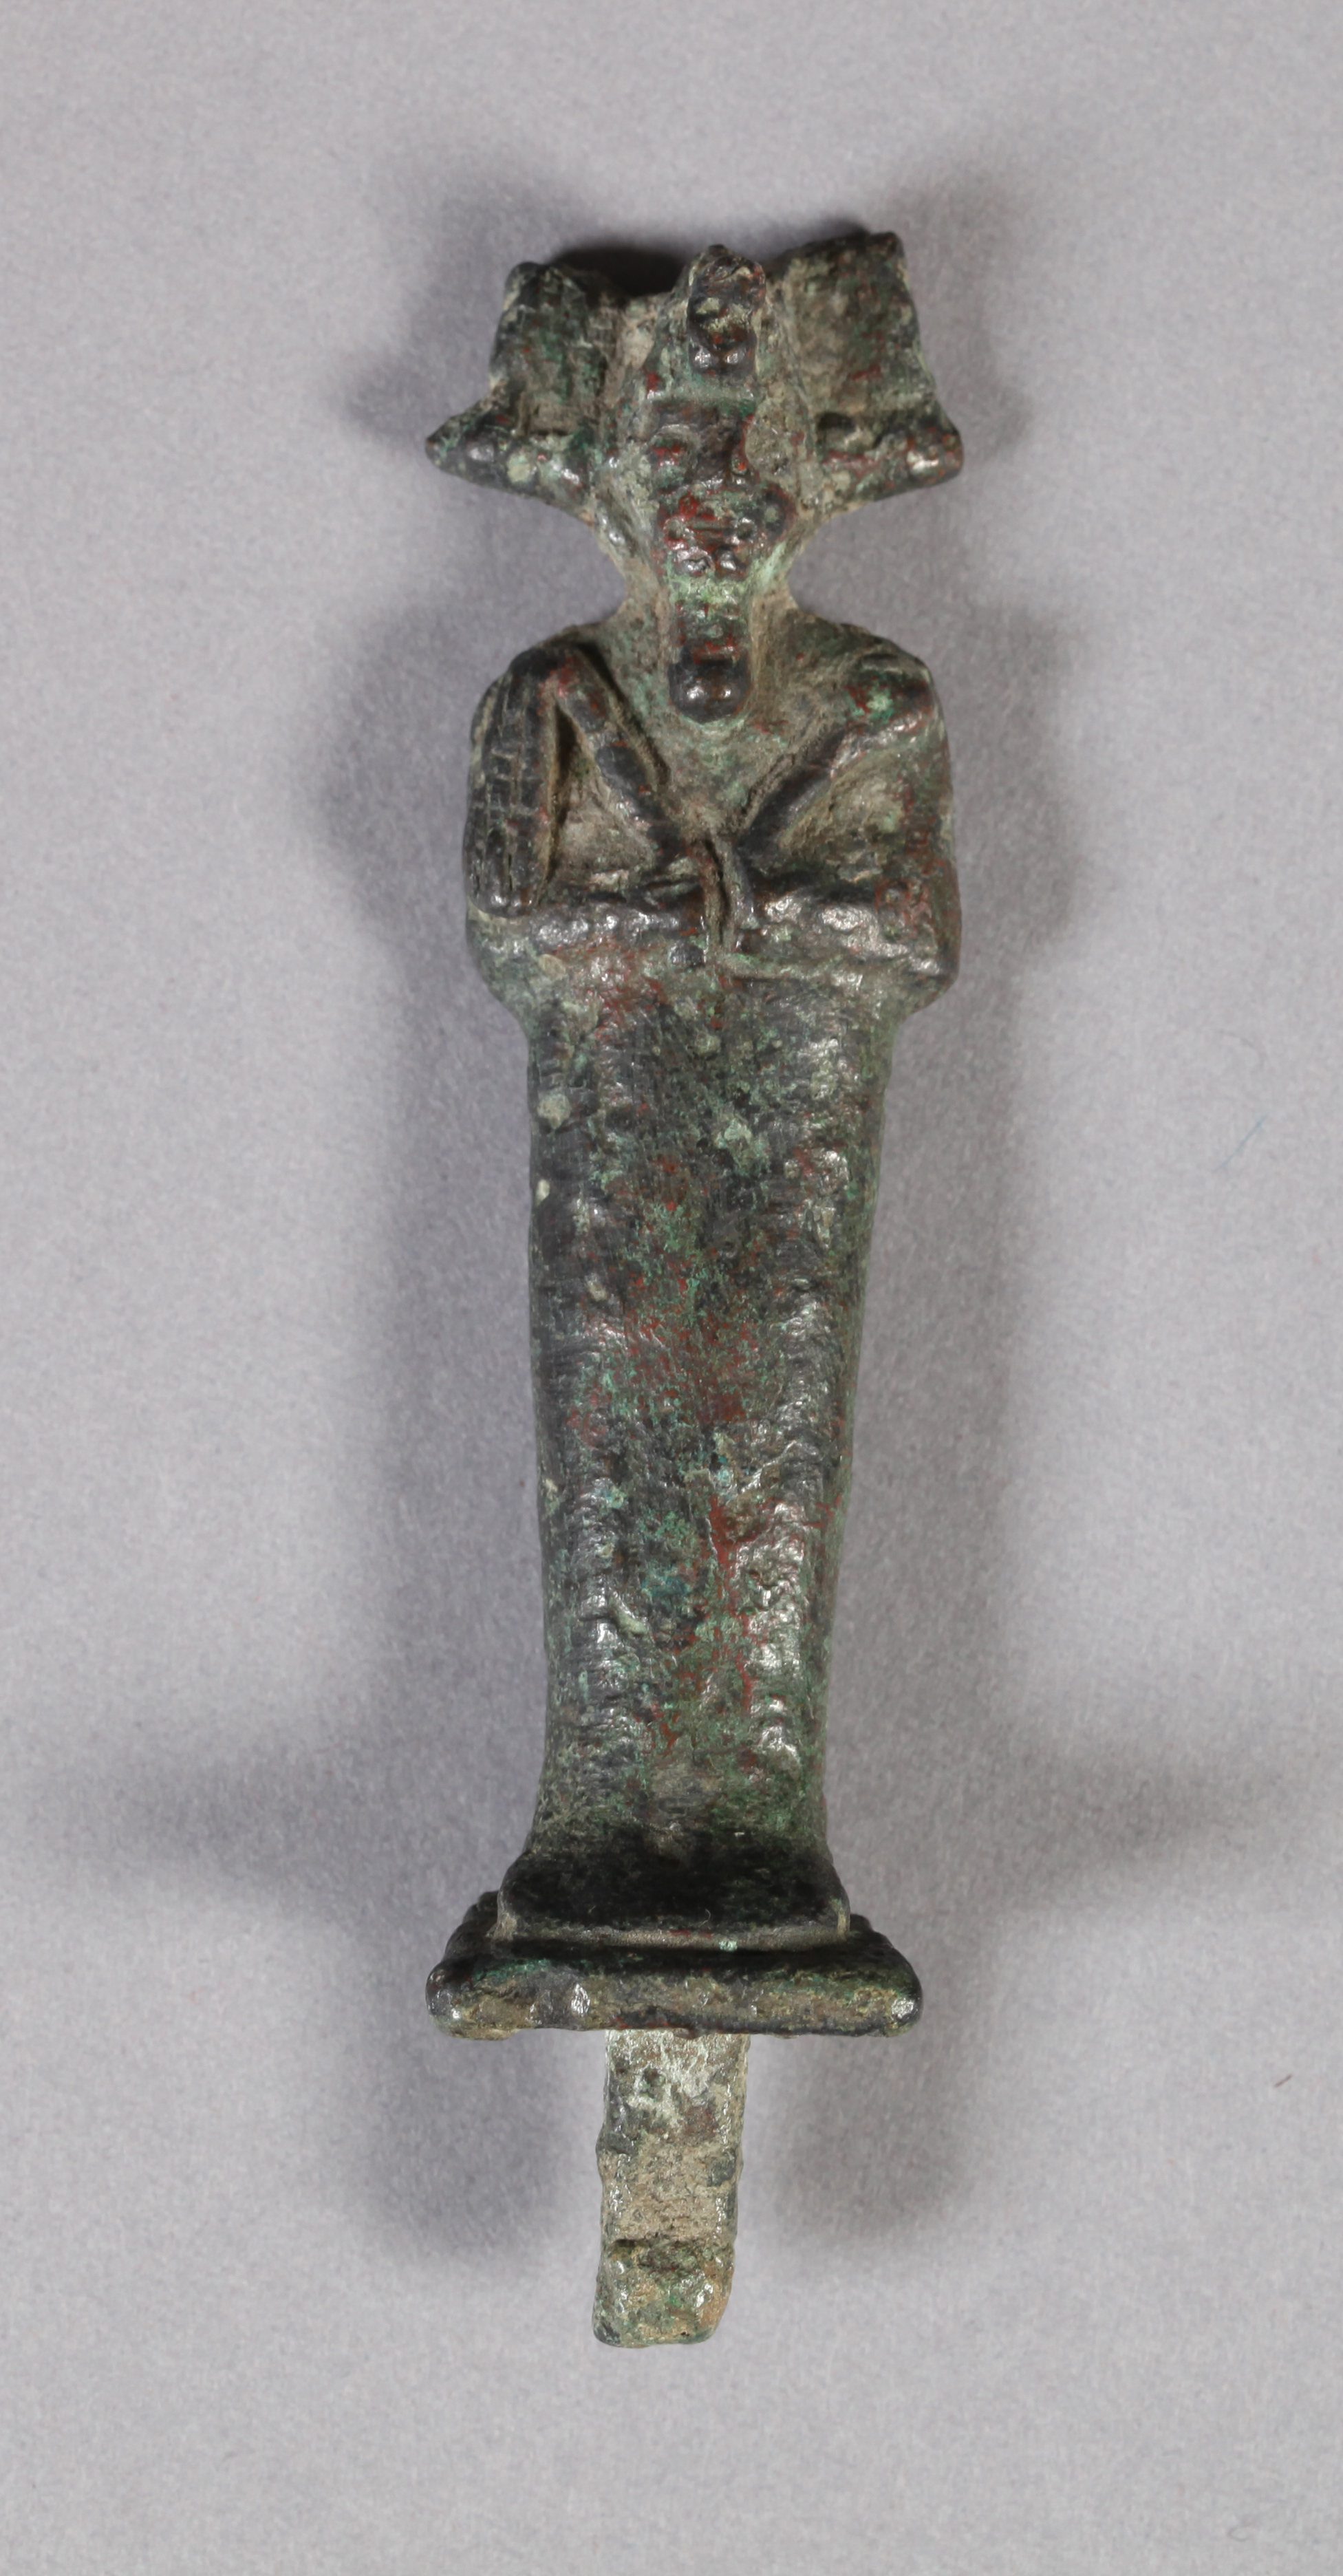 AN EGYPTIAN CAST BRONZE FIGURE OF OSIRIS with arms crossed, carrying crook and flail, ornate